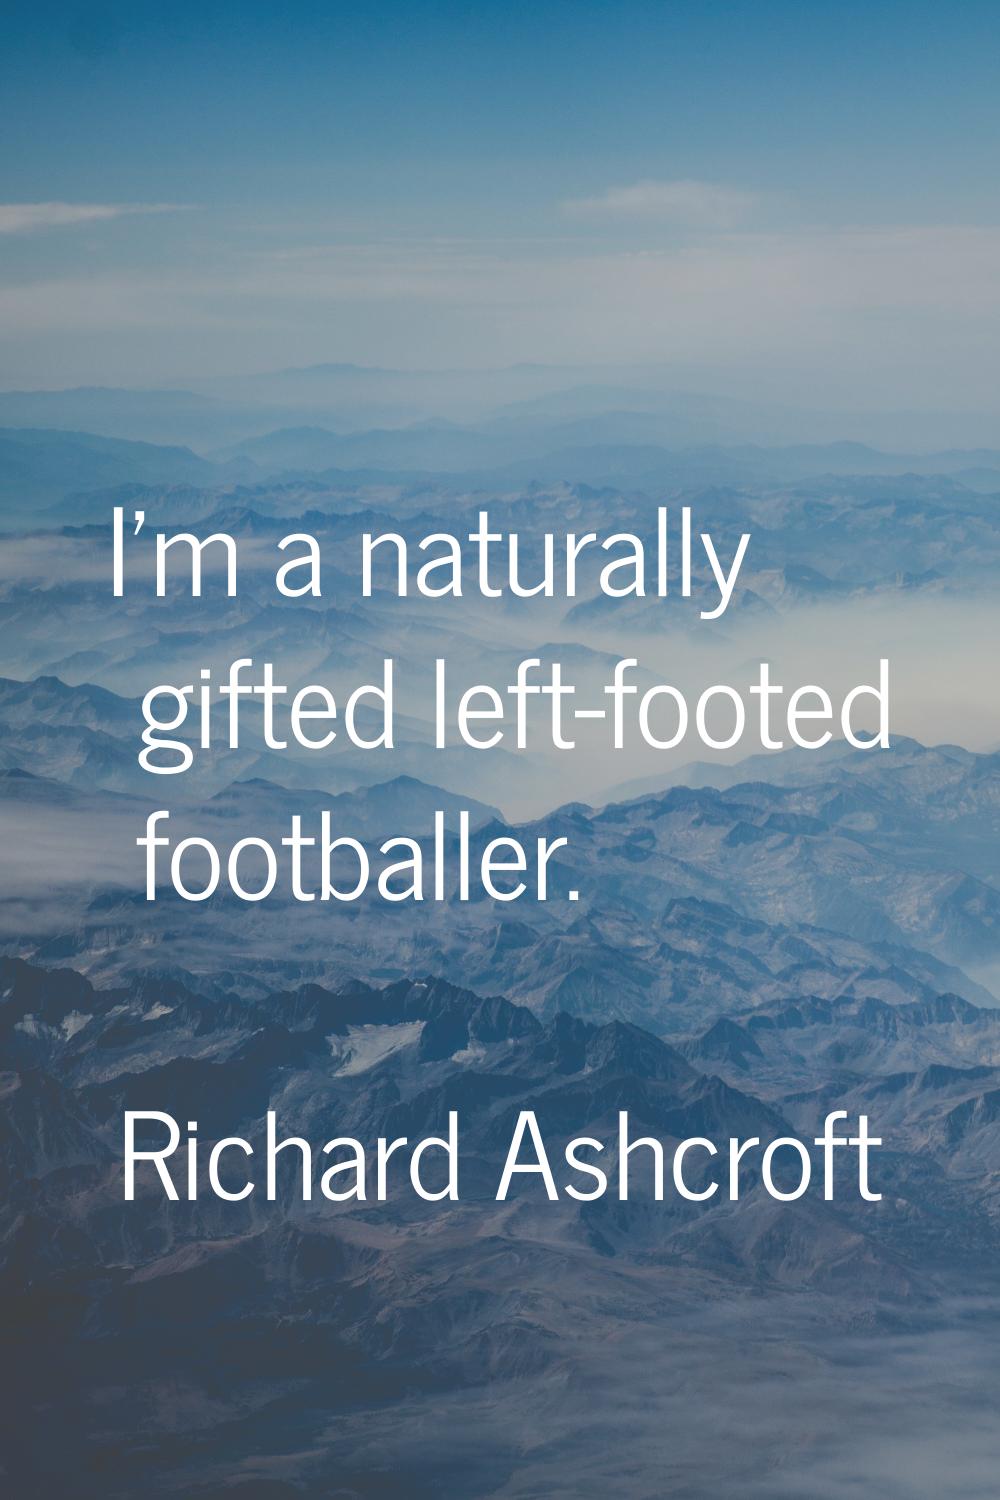 I'm a naturally gifted left-footed footballer.